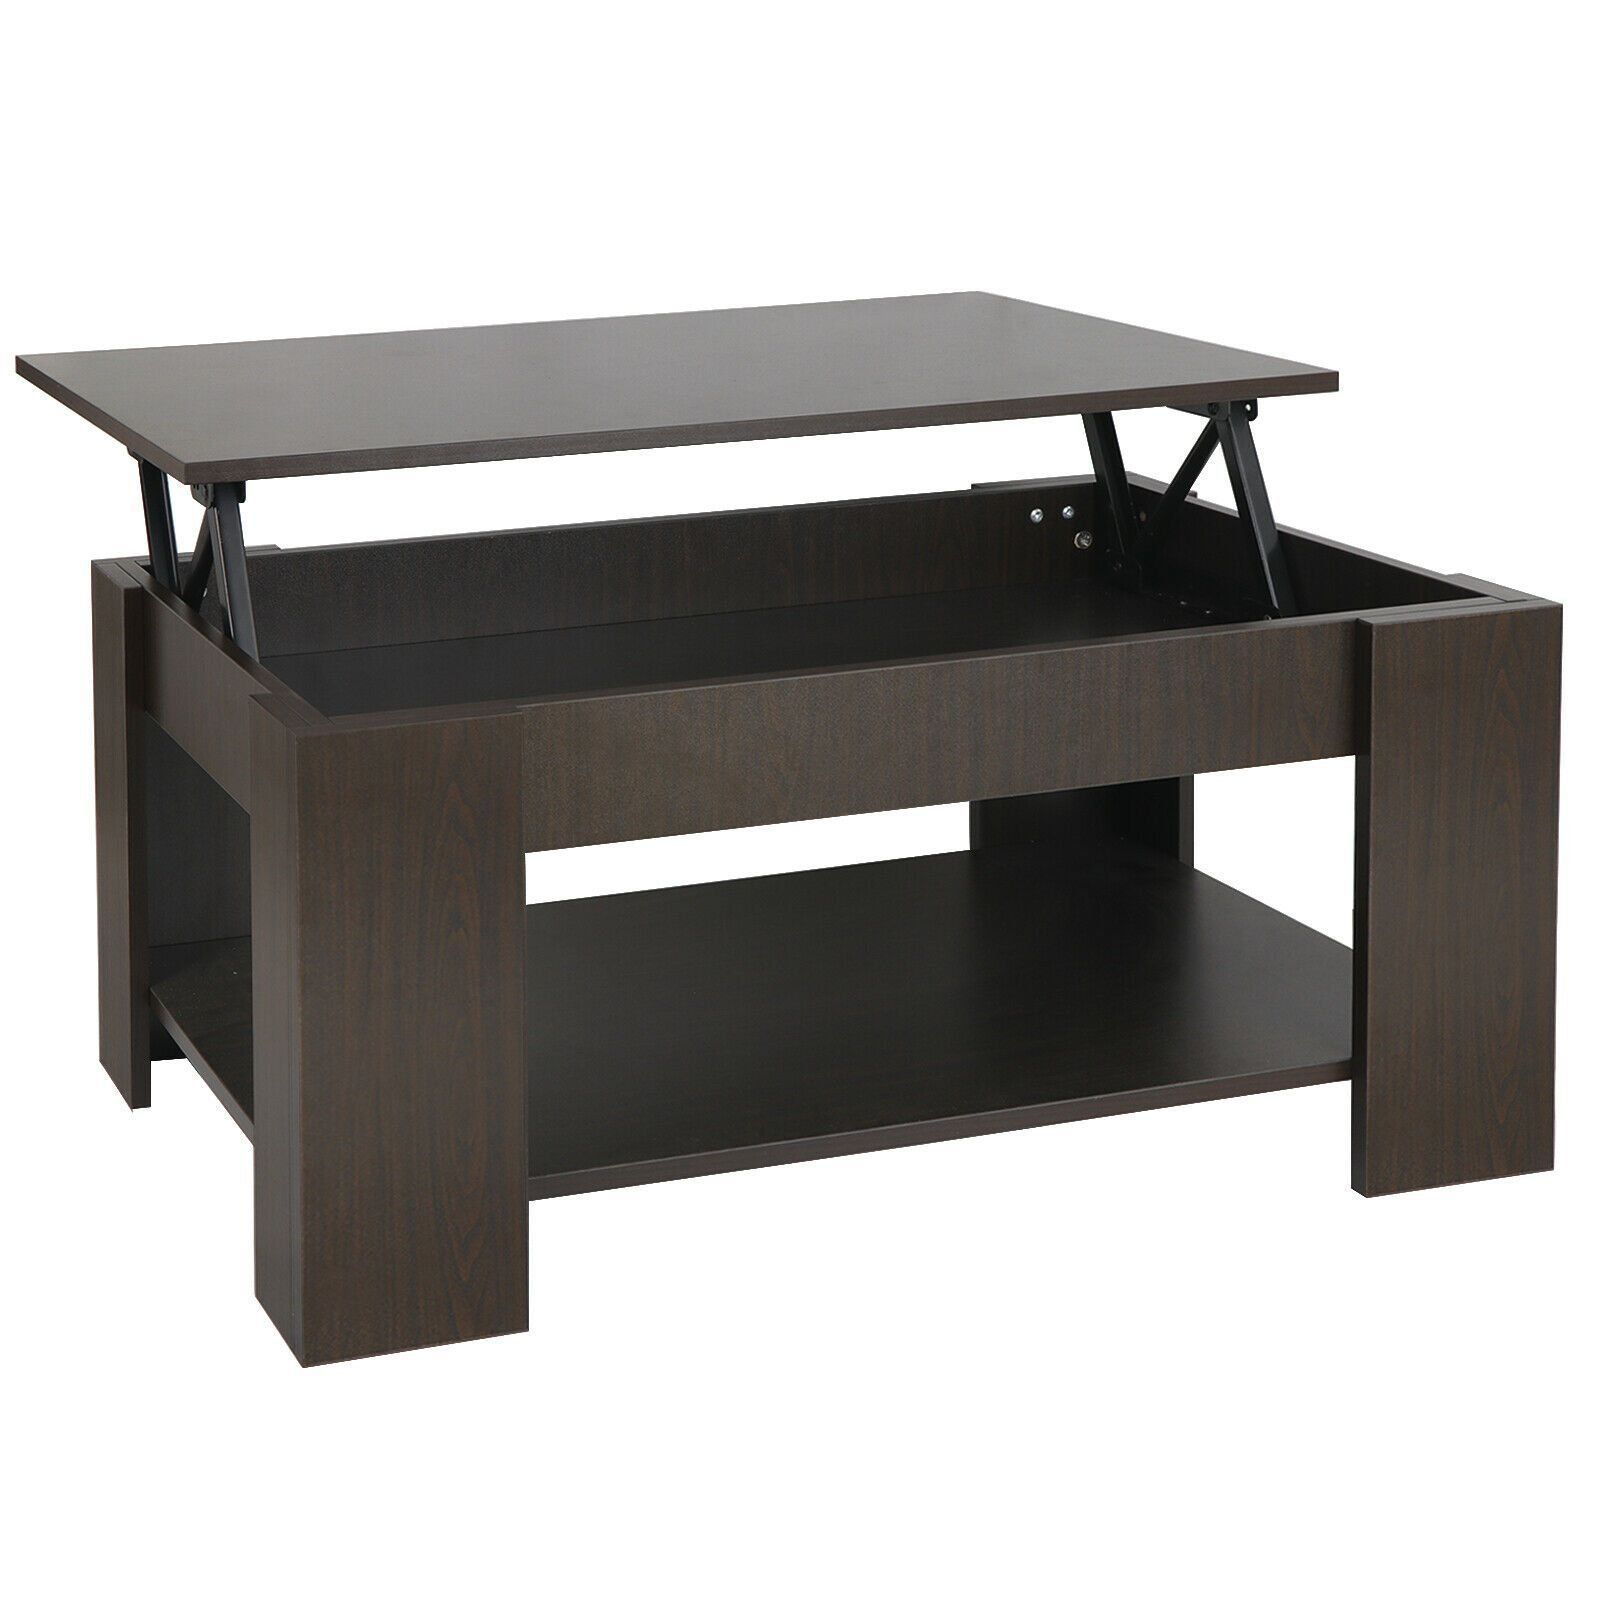 Modern Lift Up Top Tea Coffee Table Hidden Storage Compartment & Shelf Within Modern Coffee Tables With Hidden Storage Compartments (Gallery 15 of 20)